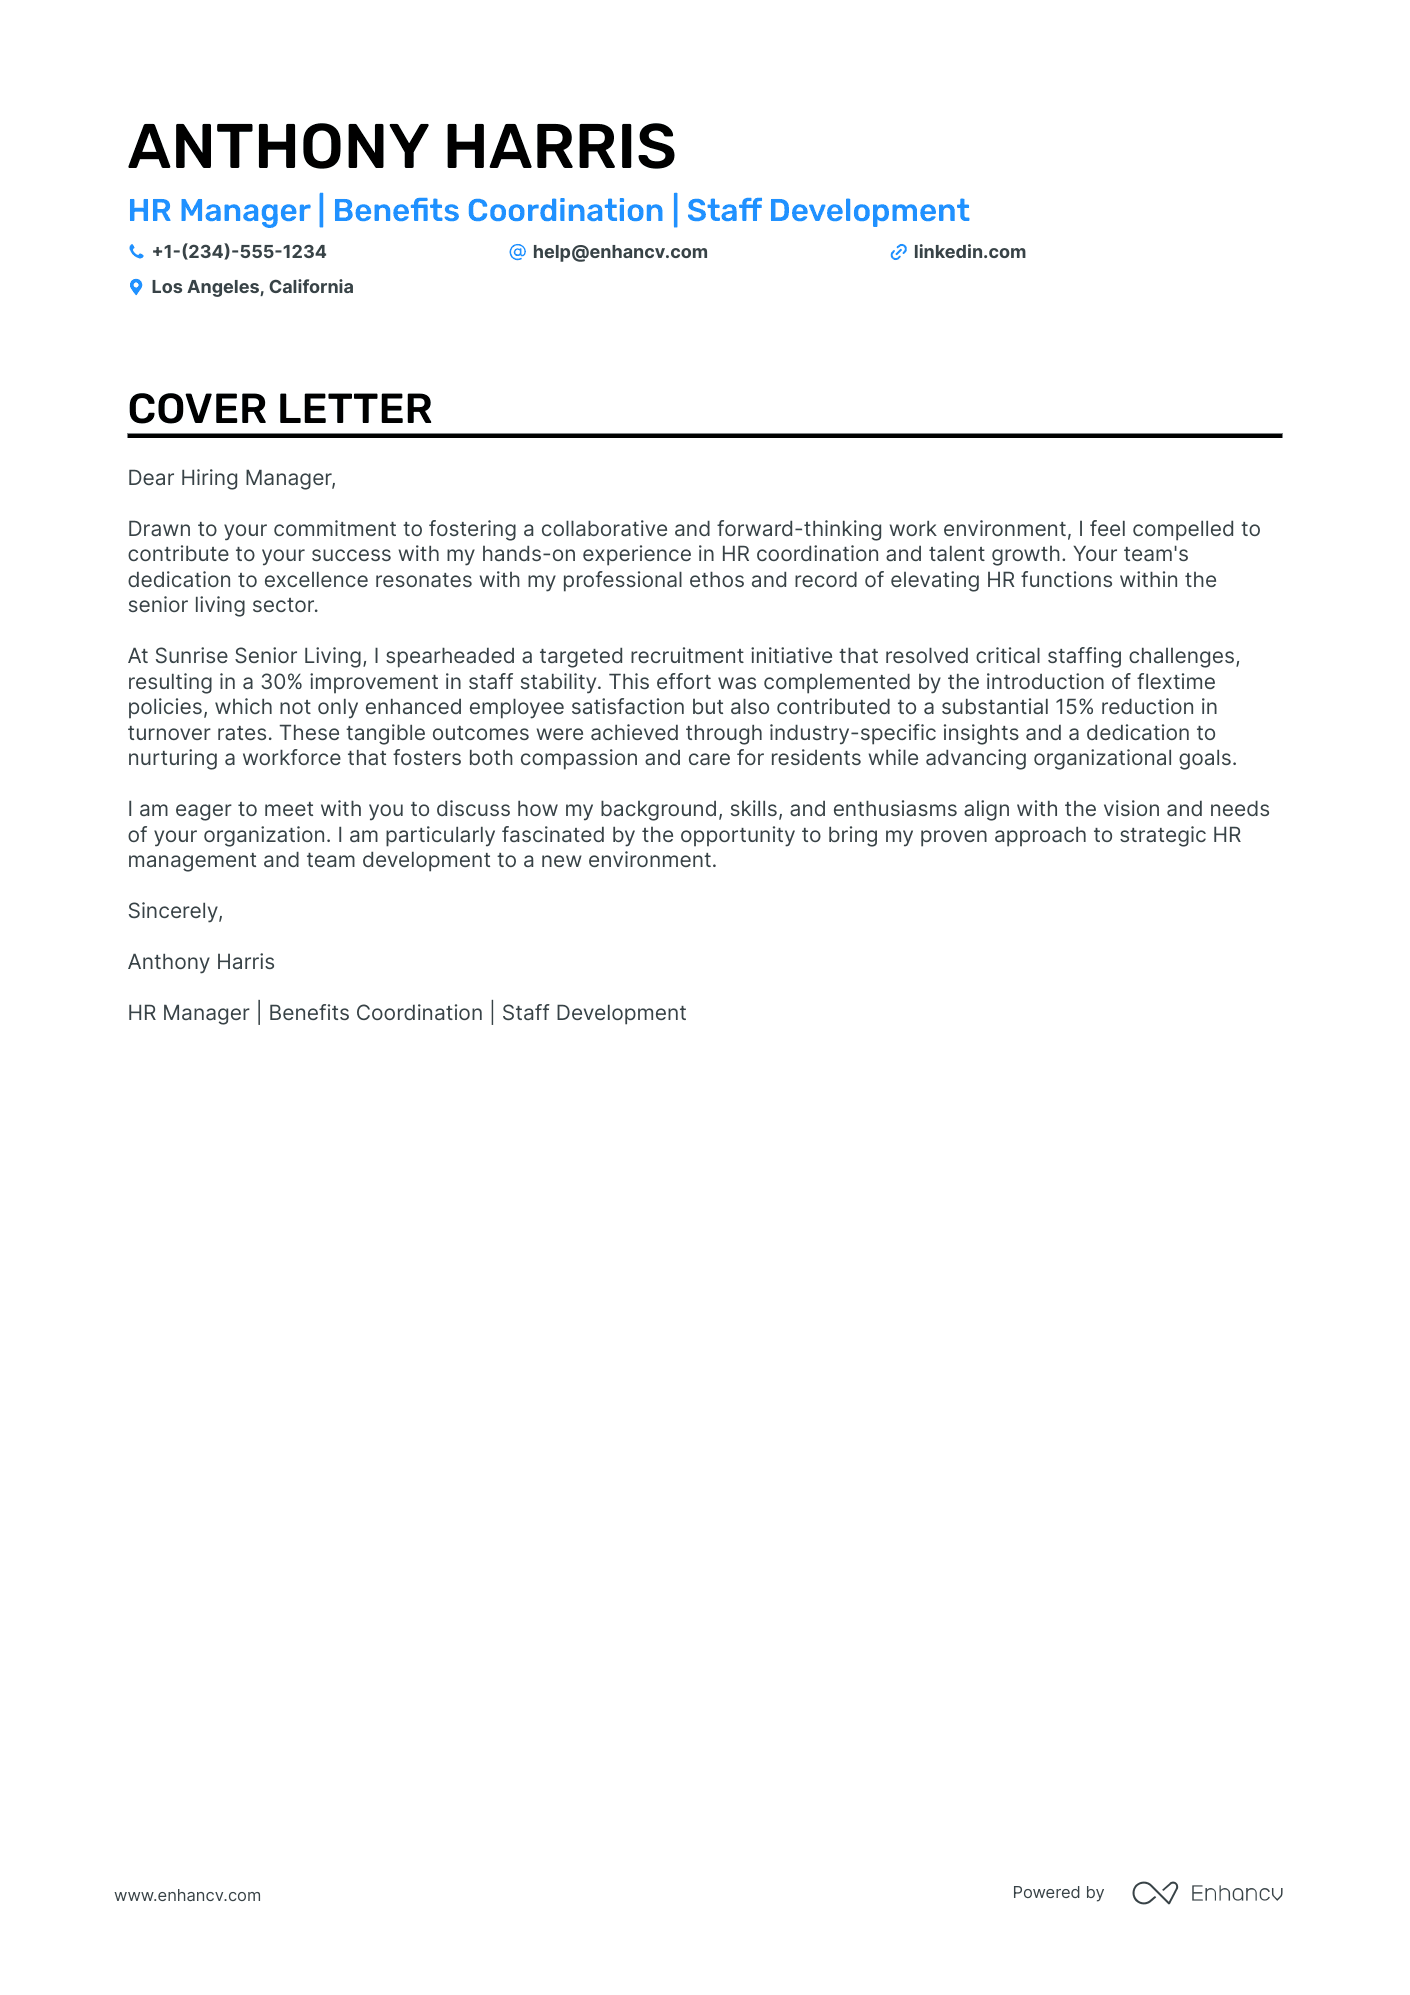 Resource Manager cover letter